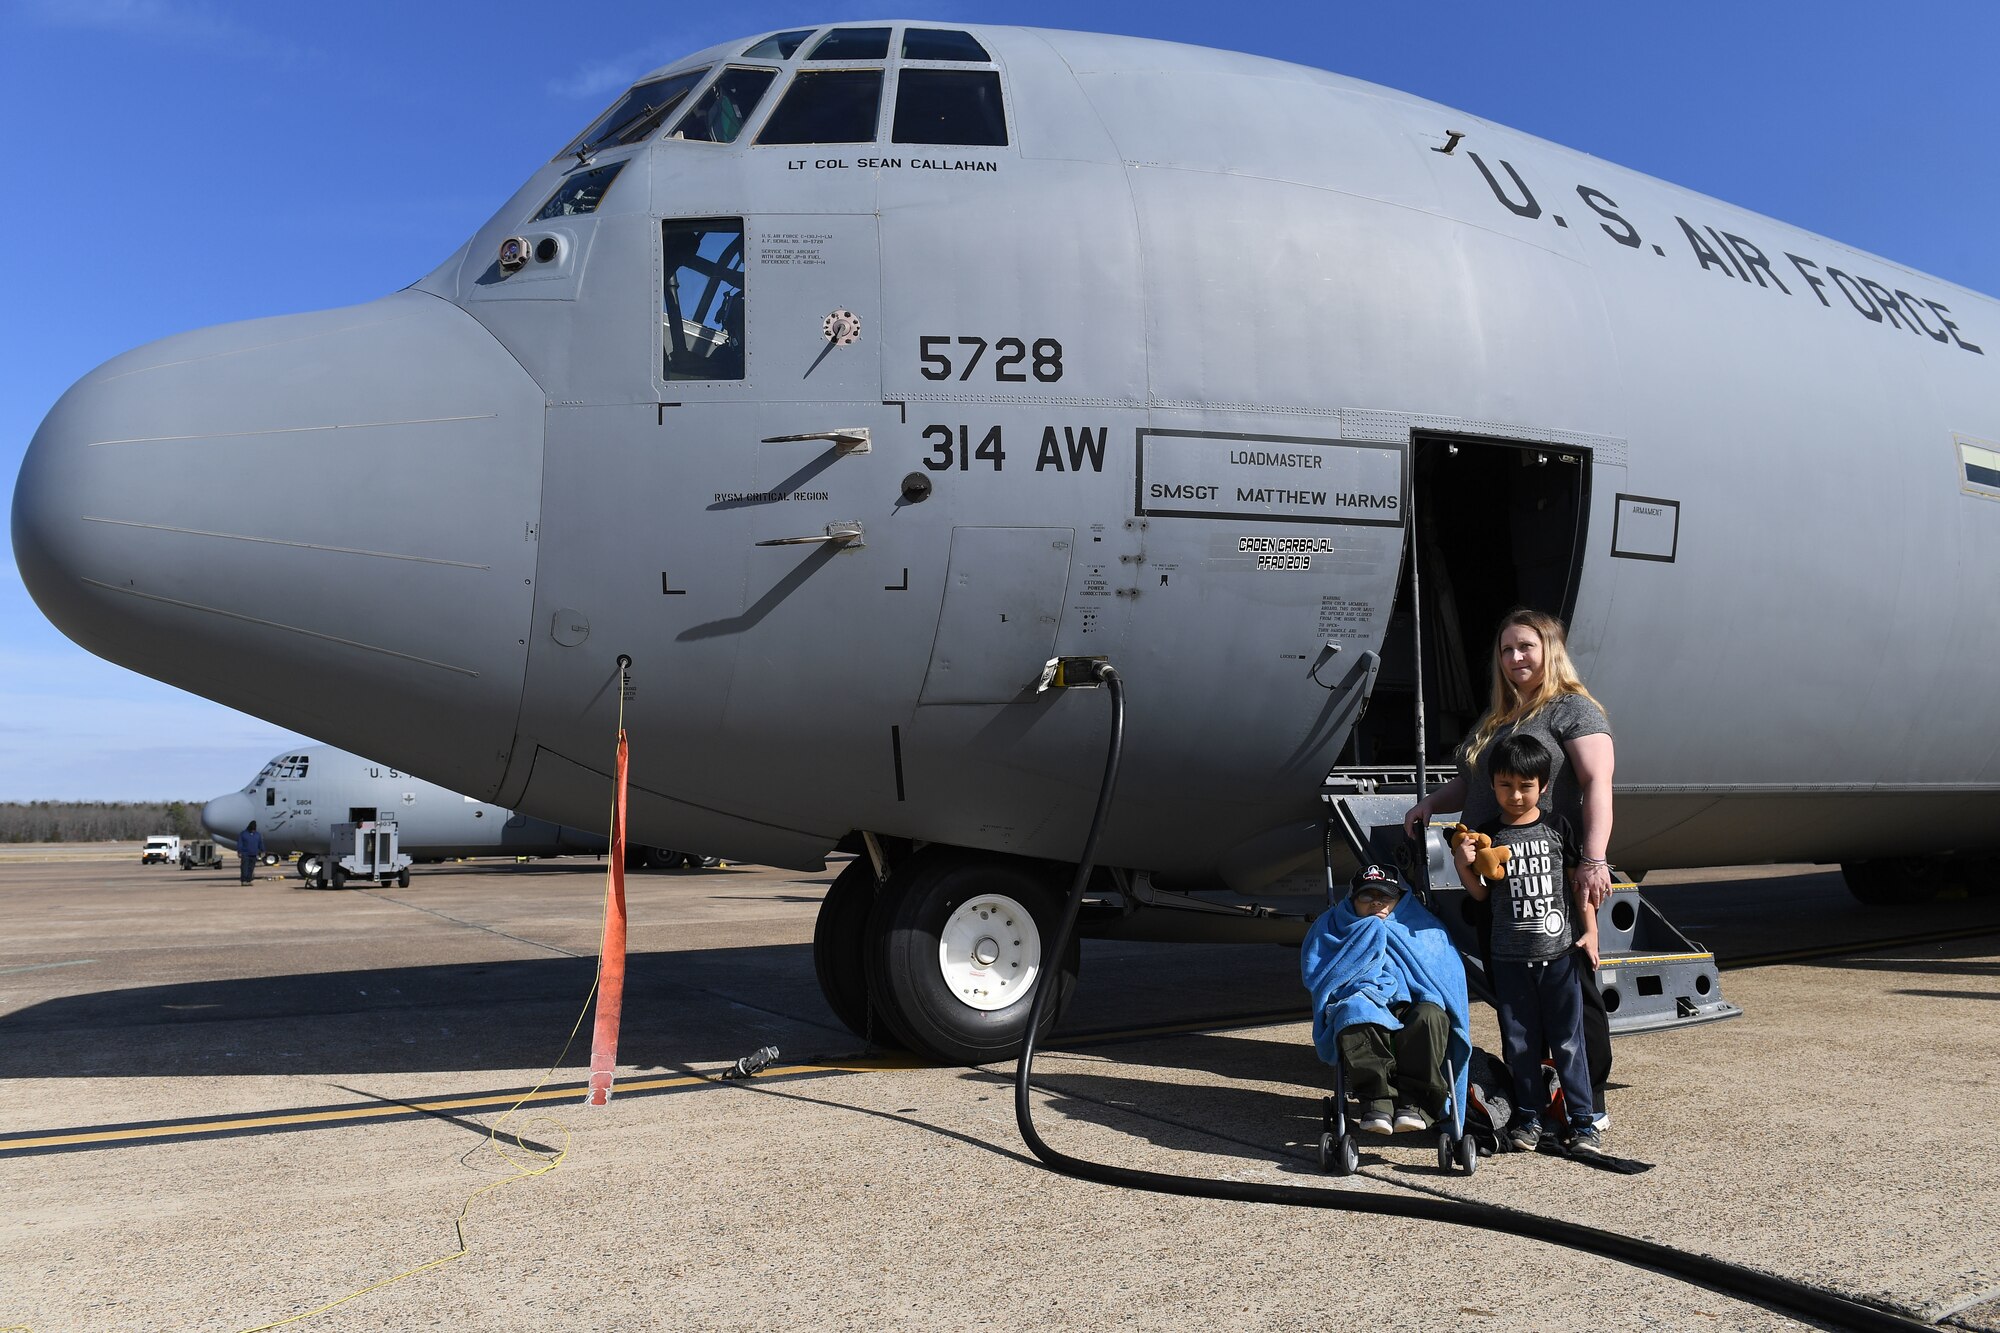 A mother and her two sons pose for a photo on the flight line in front of a C-130J airplane.